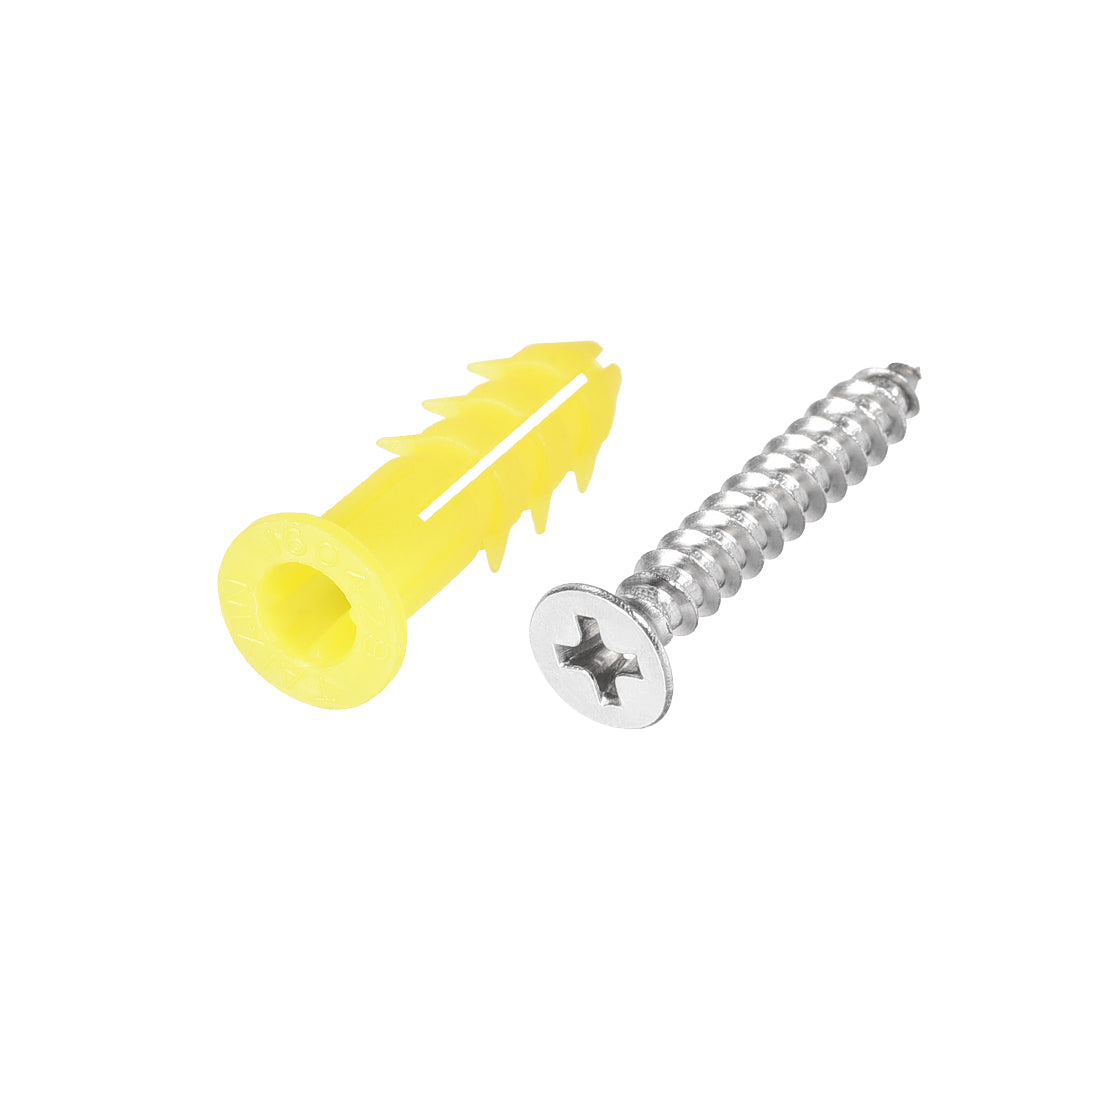 uxcell Uxcell 6x26mm Plastic Expansion Tube for Drywall with Screws, Yellow 15pcs